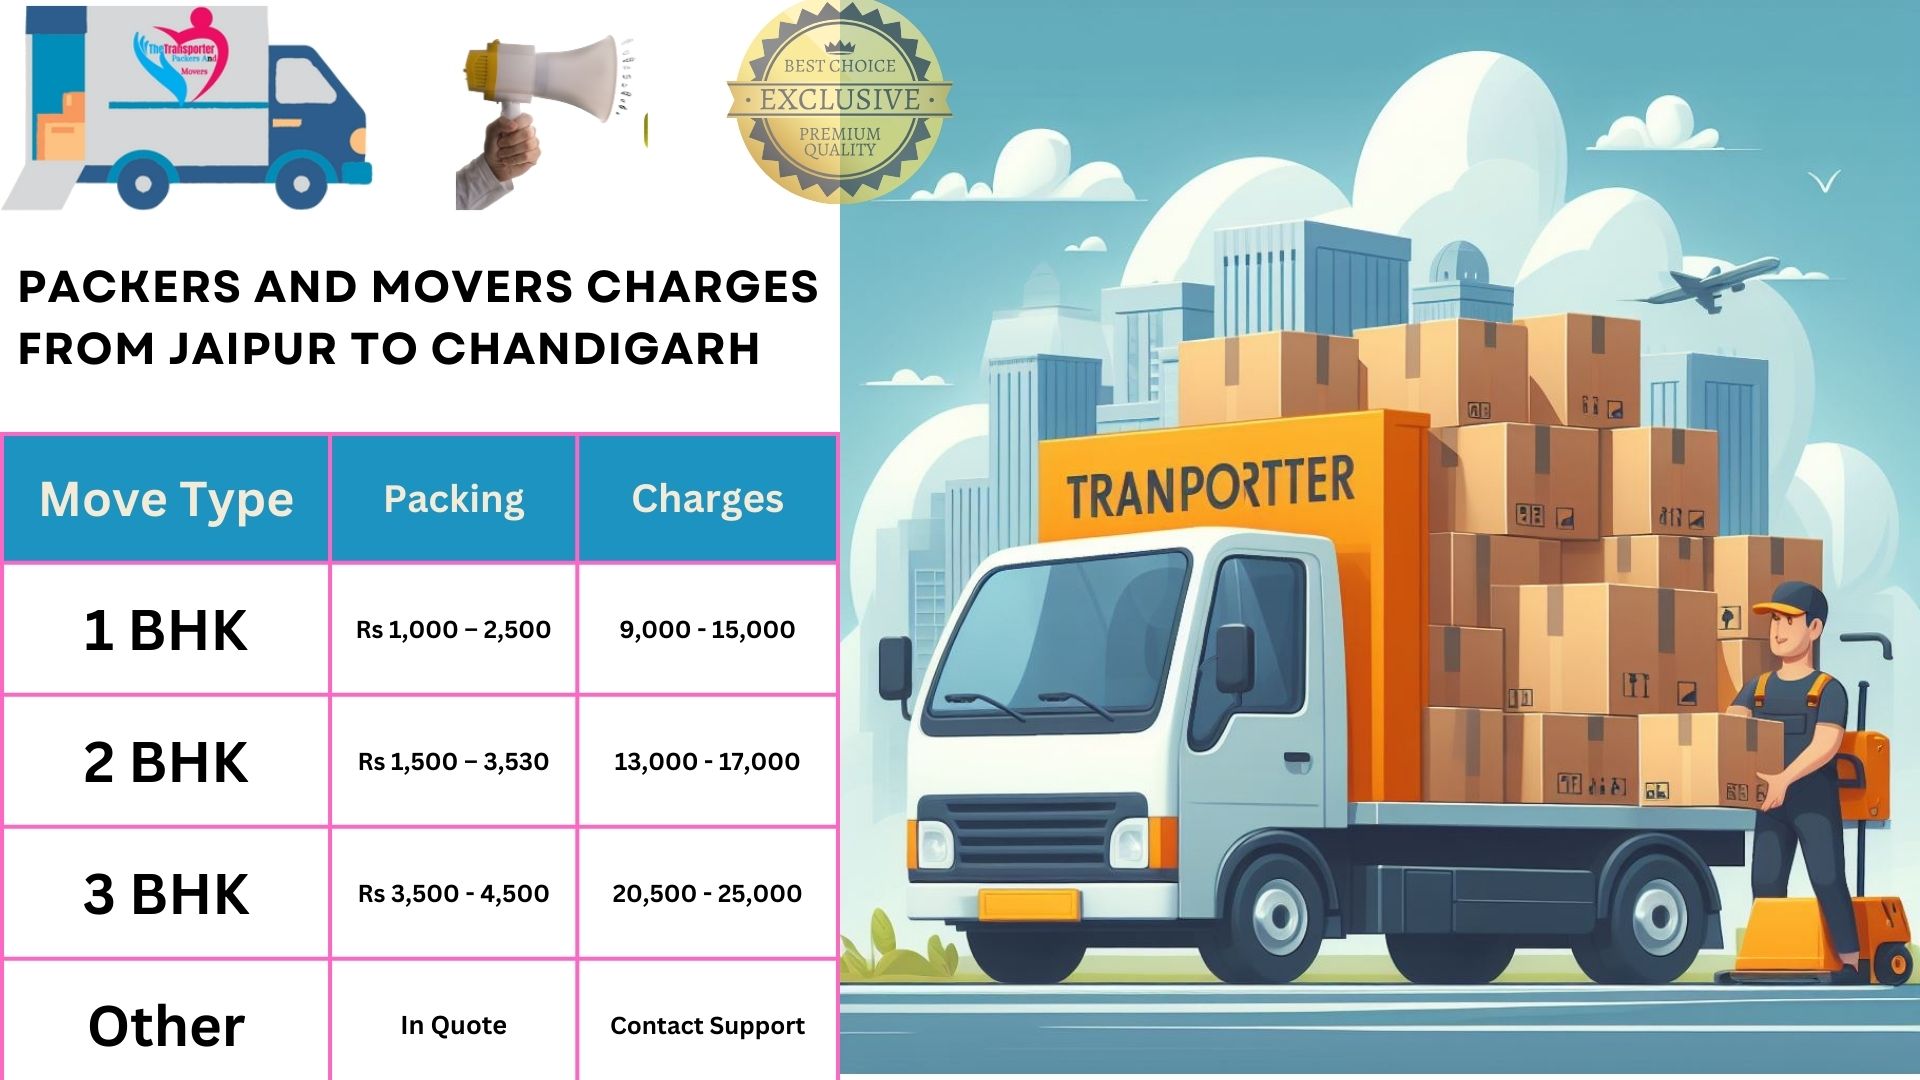 Packers and Movers charges list From Jaipur to Chandigarh